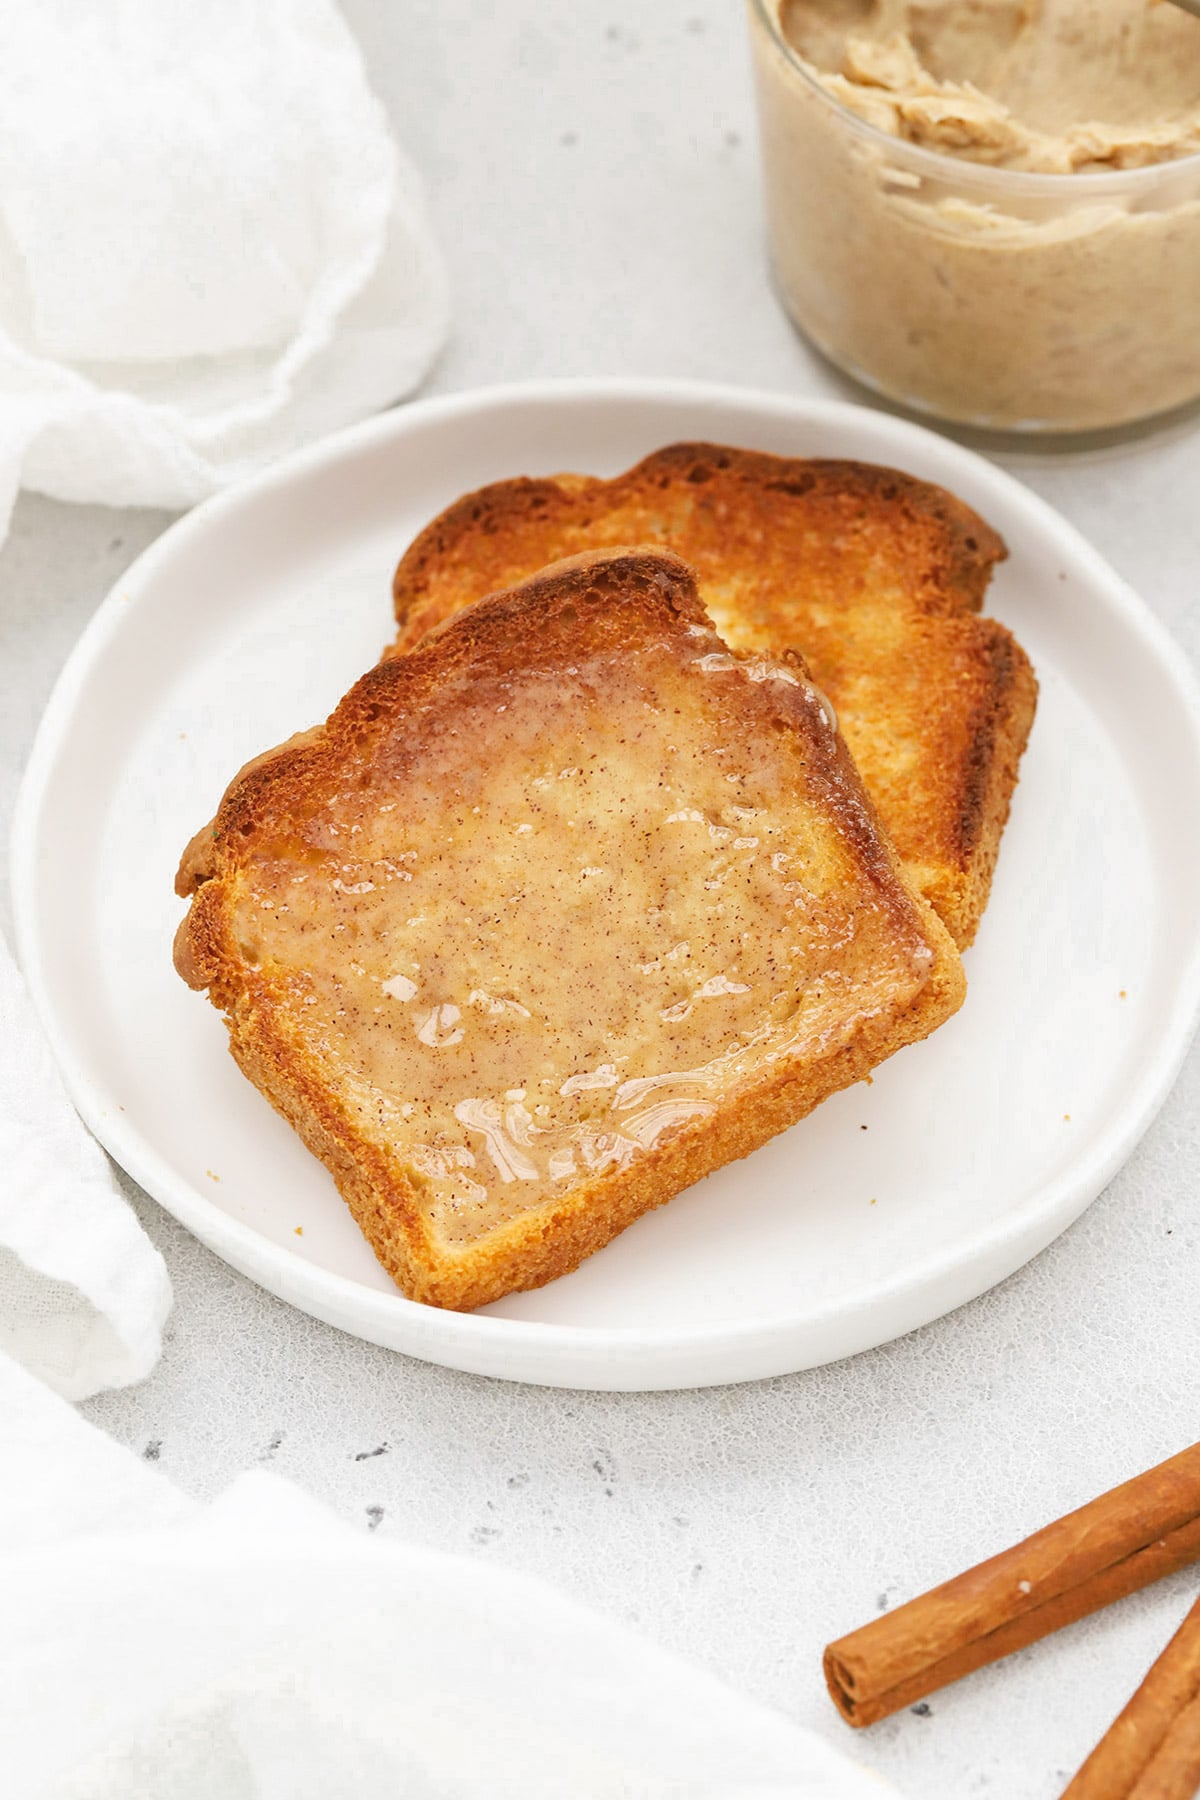 Front view of two slices of gluten-free toast topped with whipped cinnamon butter